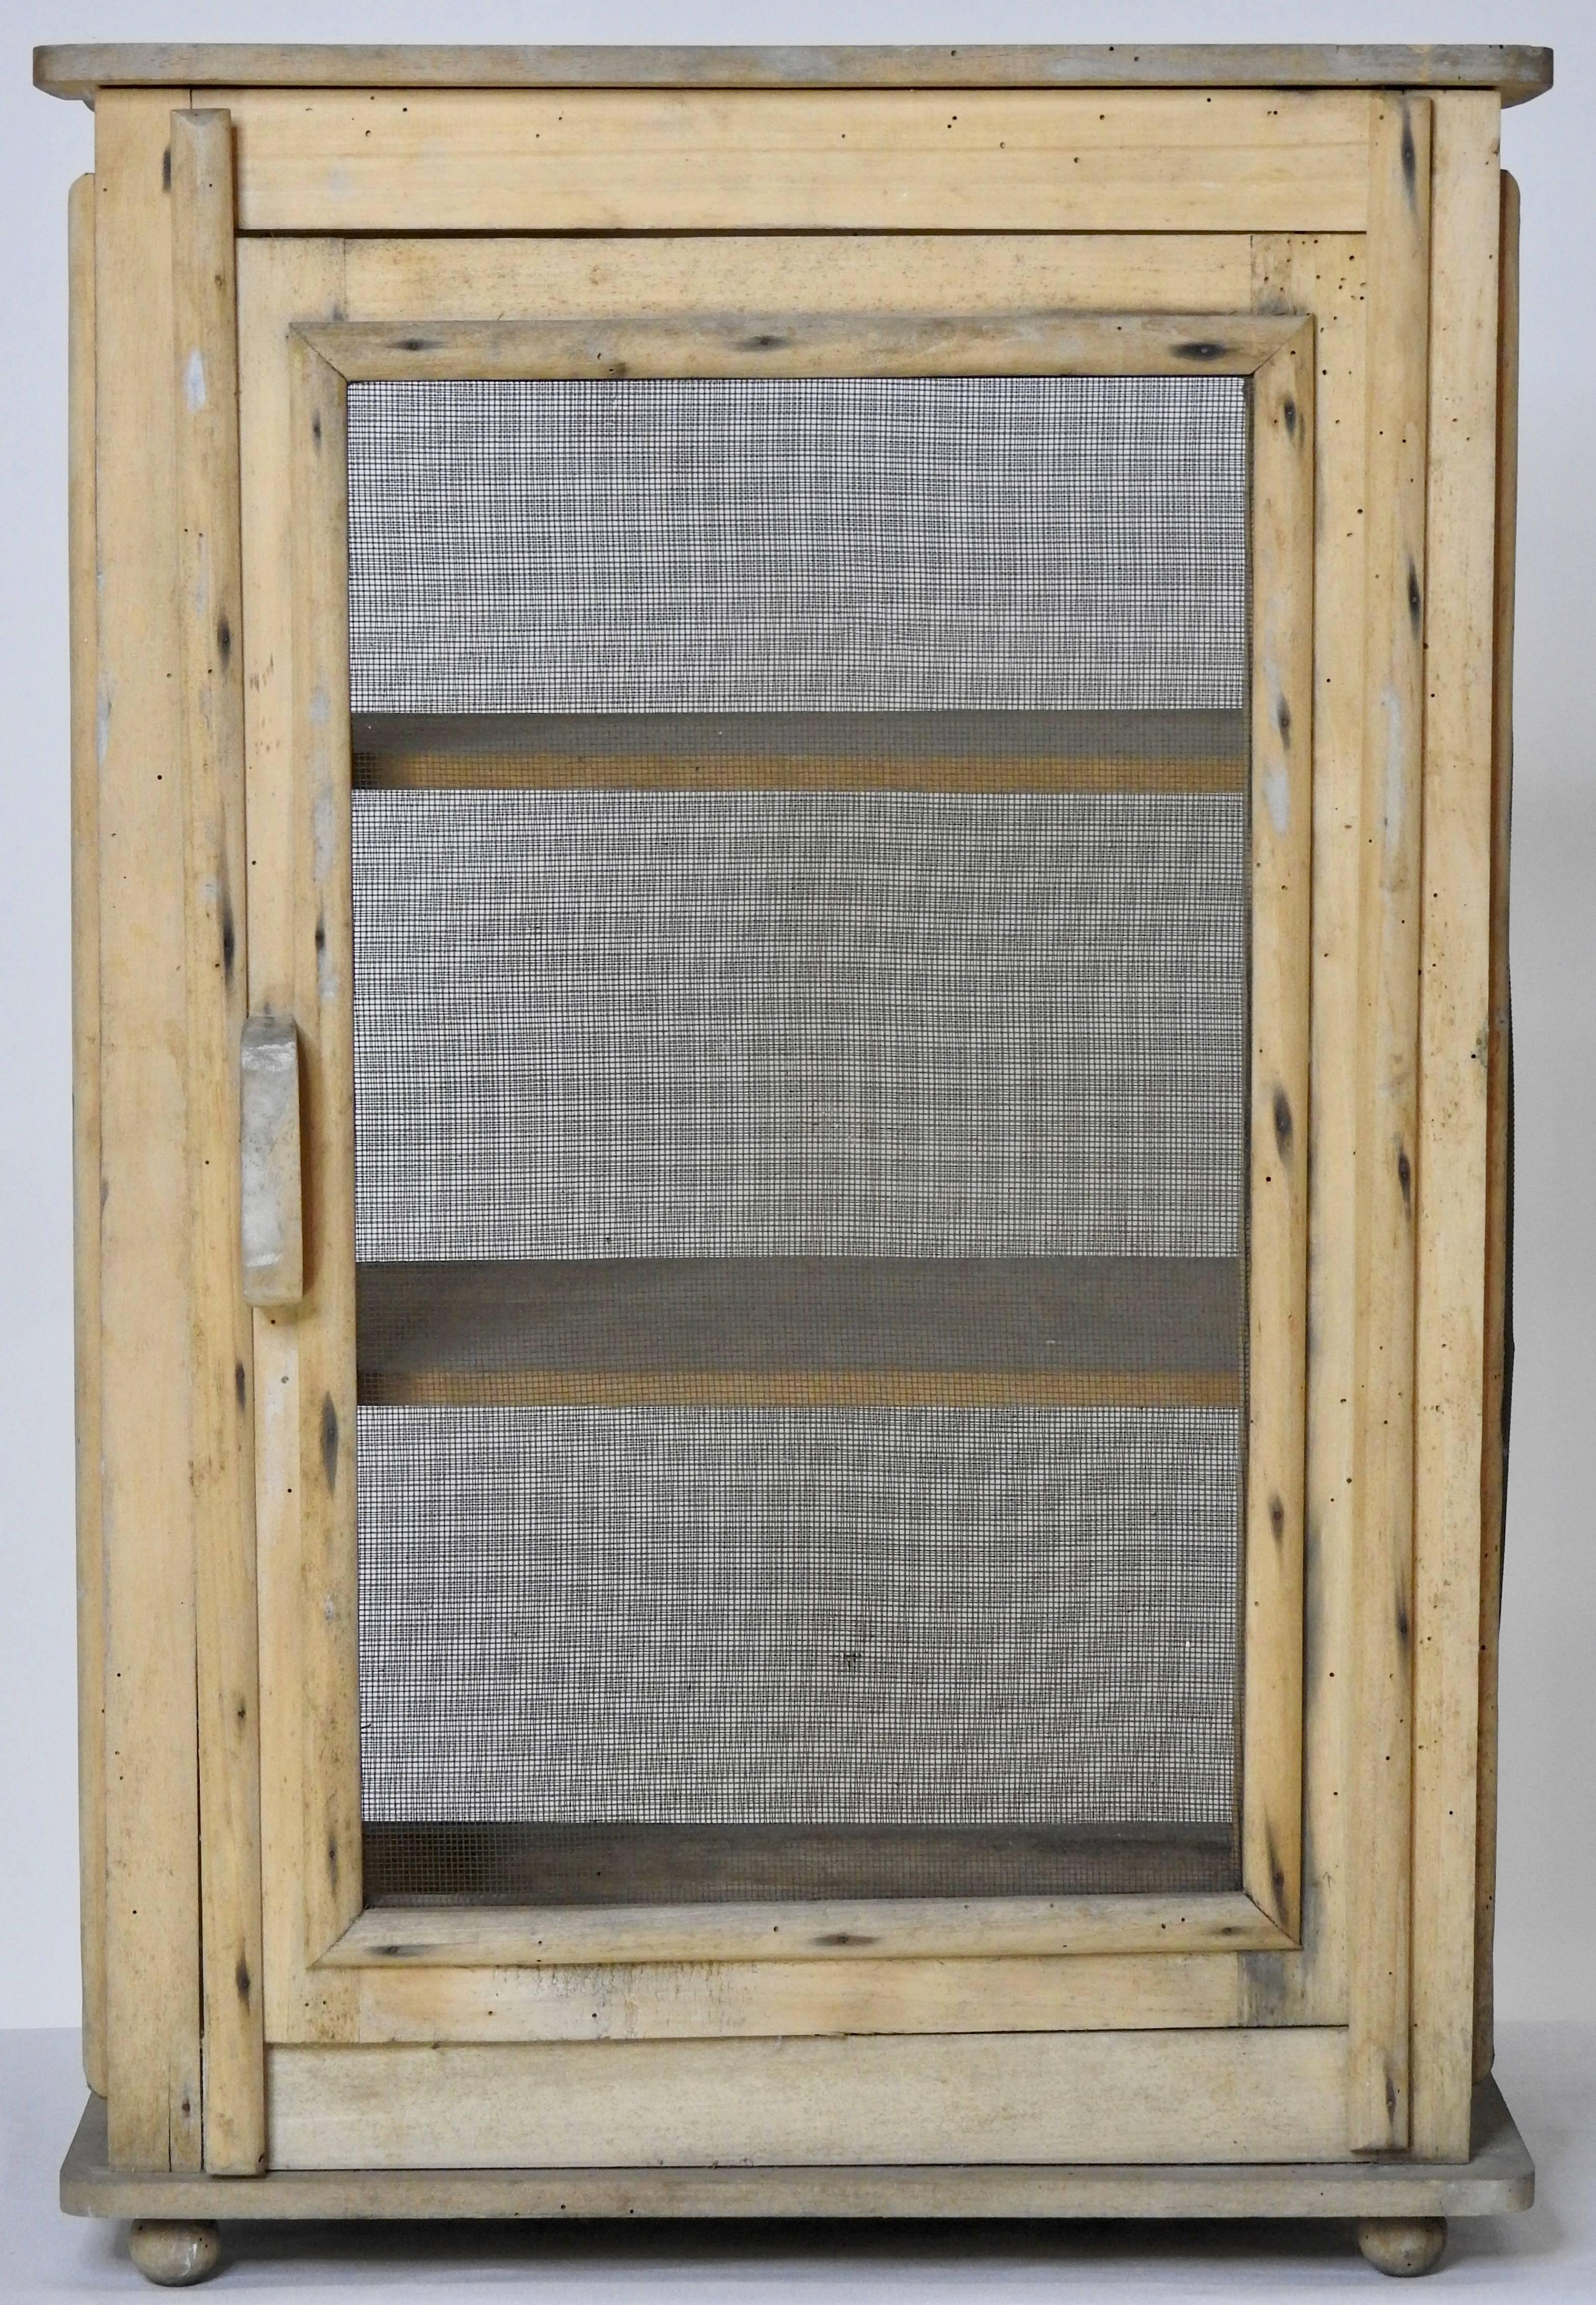 Natural wood and wire screen make up this unique French cheese safe. Wood is very light weight and has not been painted or finished. It sits on four ball feet with the bottom and two shelves above. Has a wooden pull handle to open and a closing